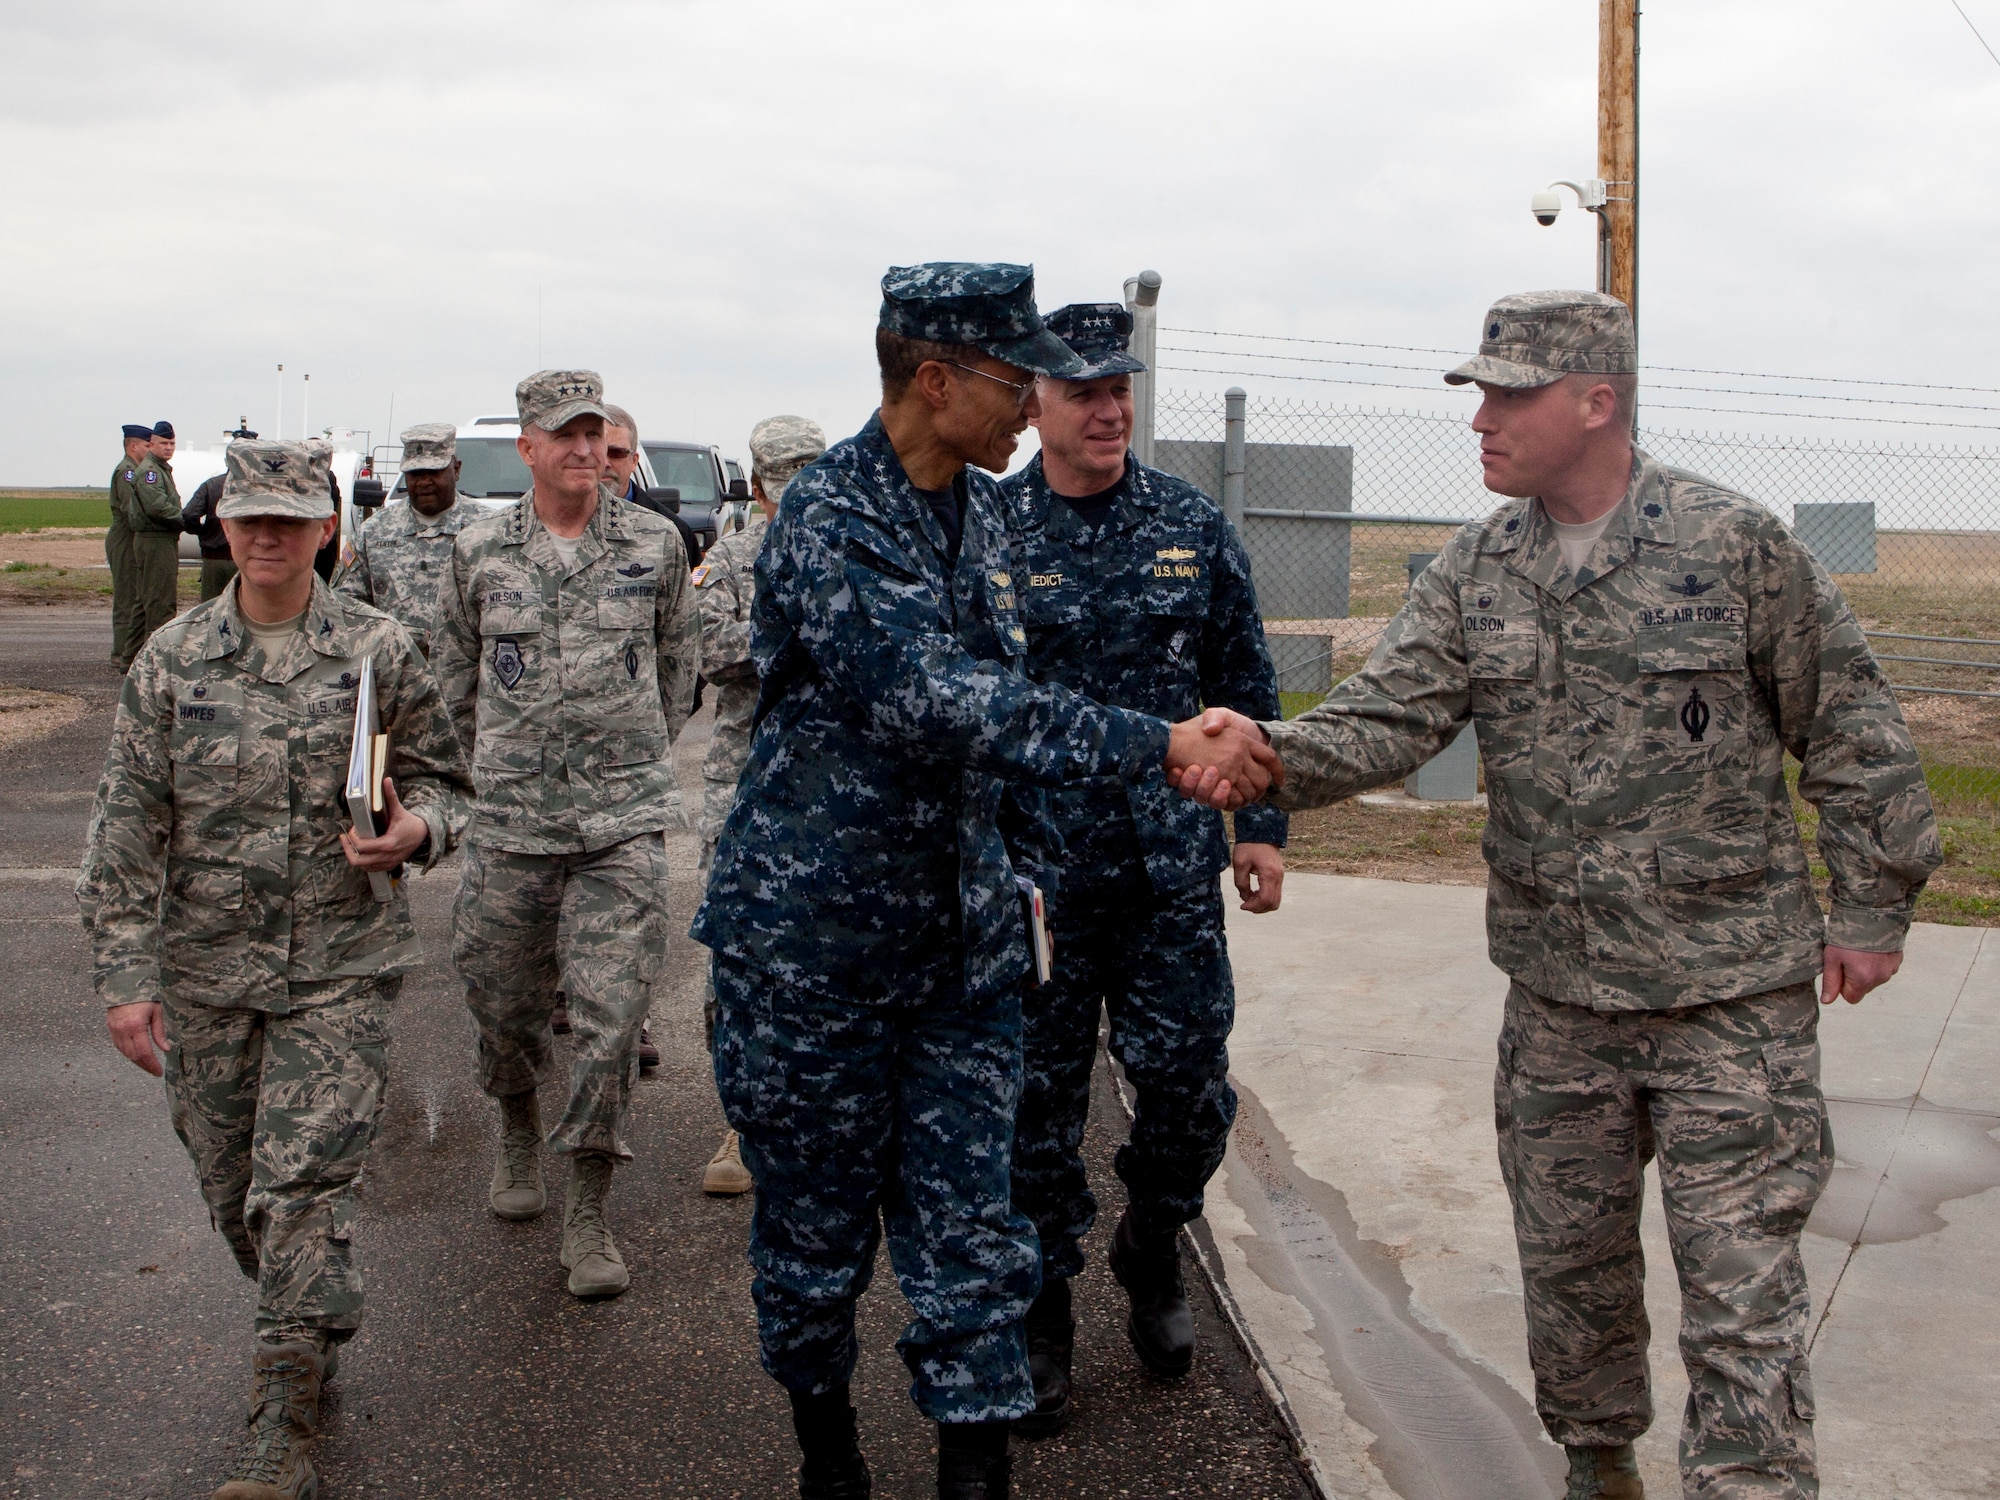 U.S. Navy Adm. Cecil D. Haney, U.S. Strategic Command commander, greets U.S. Air Force Col. Jeremy Olson, 319th Missile Squadron commander, at a missile alert facility in Nebraska, as part of his visit to F.E. Warren Air Force Base, Wyo., April 27, 2015. Haney traveled to F.E. Warren to see firsthand the men and women performing the ICBM mission 24/7, 365, and to chair the Intercontinental Ballistic Missile Stakeholders meeting, one of several such meetings that will be held this year. USSTRATCOM is one of nine DoD unified combatant commands and is charged with strategic deterrence; space operations; cyberspace operations; joint electronic warfare; global strike; missile defense; intelligence, surveillance and reconnaissance; combating weapons of mass destruction; and analysis and targeting. (U.S. Air Force photo by Lan Kim)